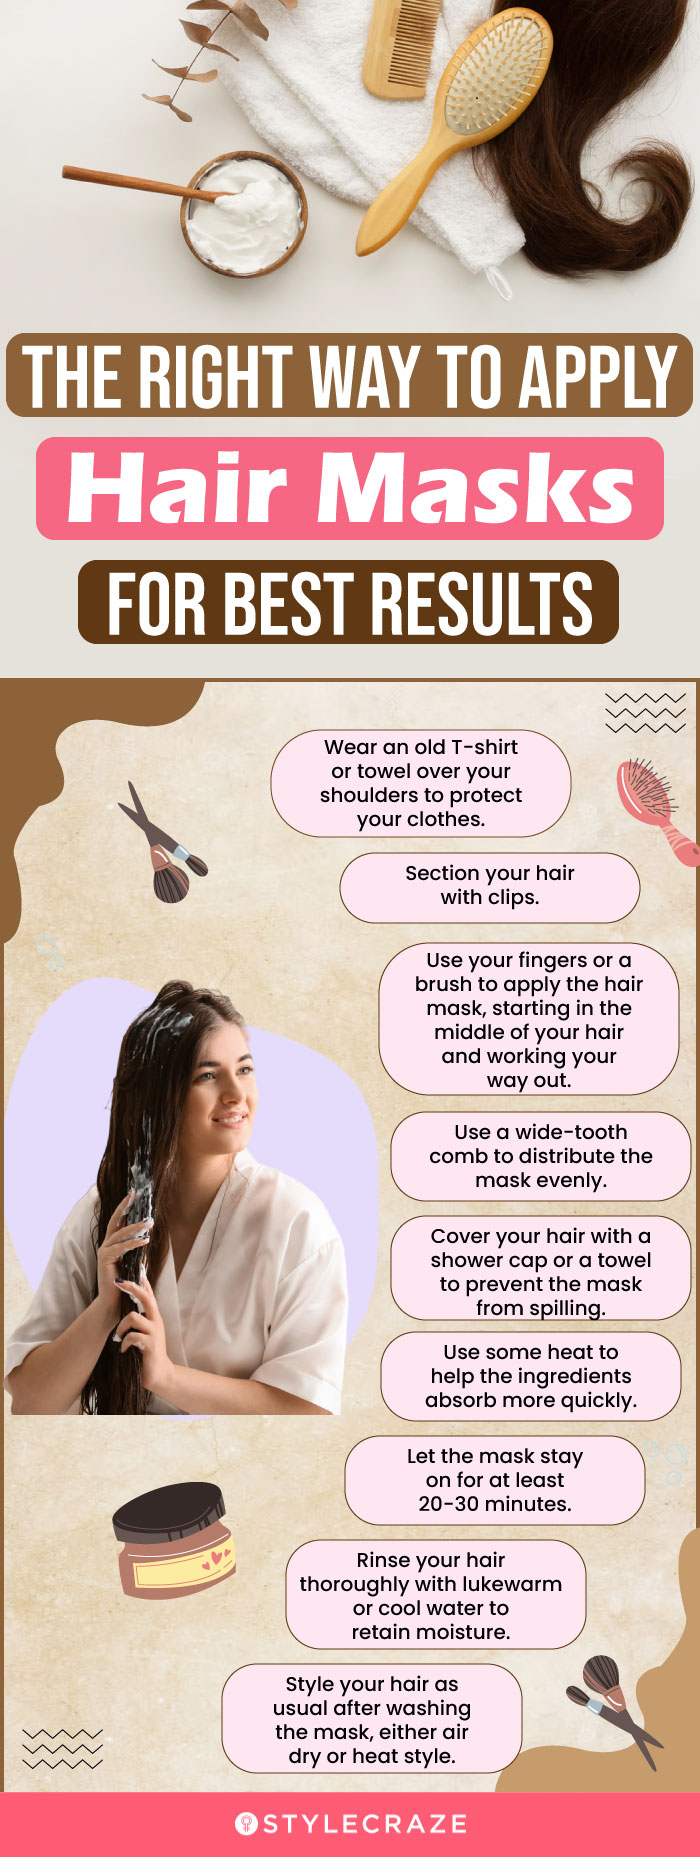 Right Way To Apply Hair Masks For Best Results (infographic)